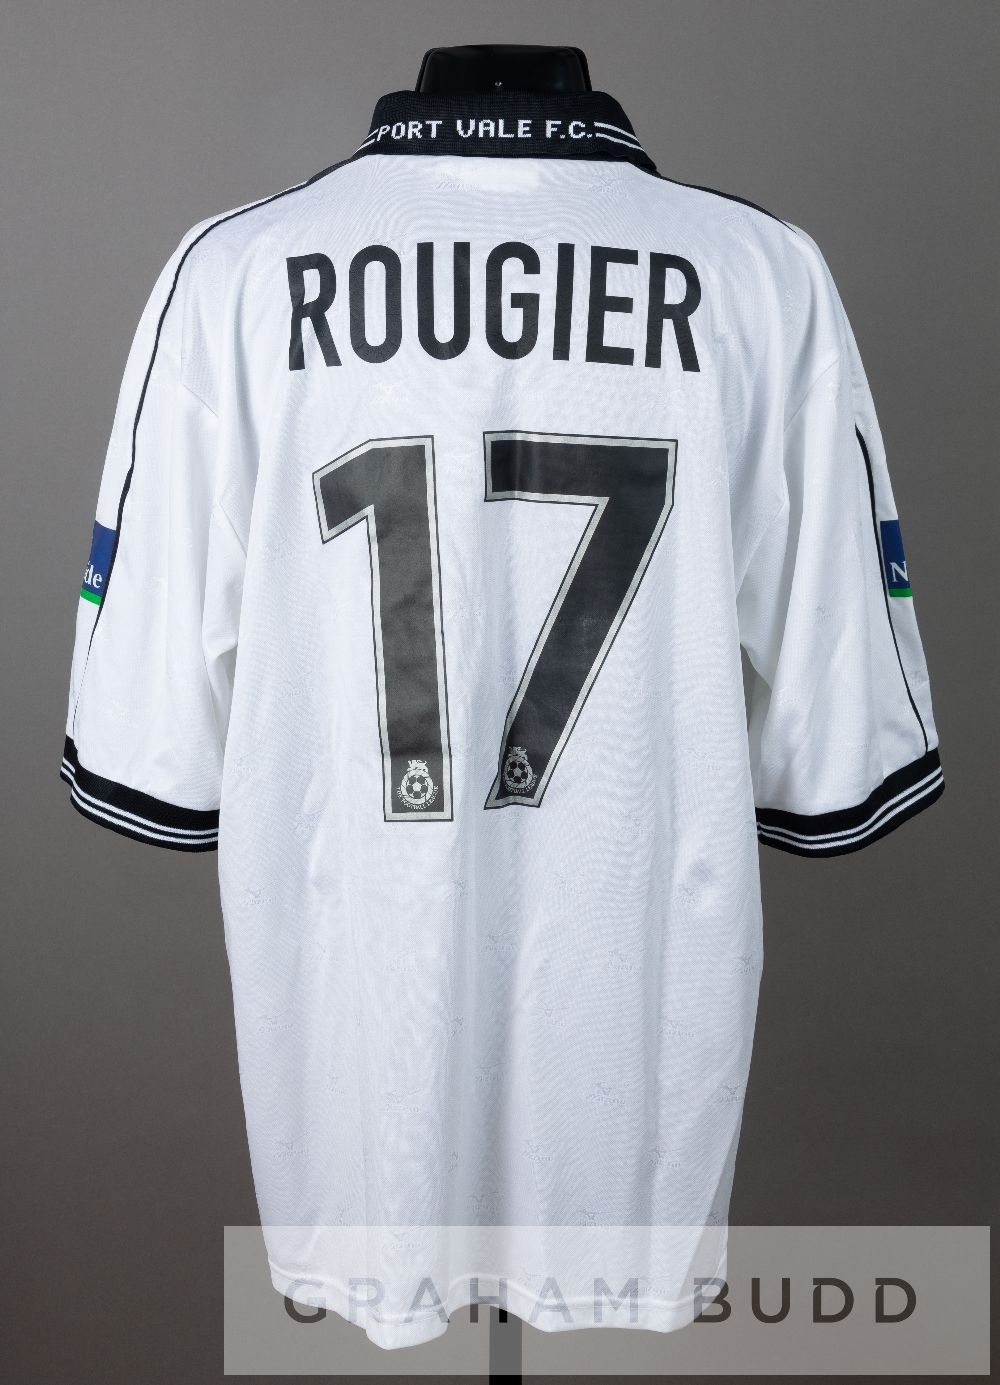 Tony Rougier white and black Port Vale no.17 jersey, season 1999-2000, by Mizuno, short-sleeved with